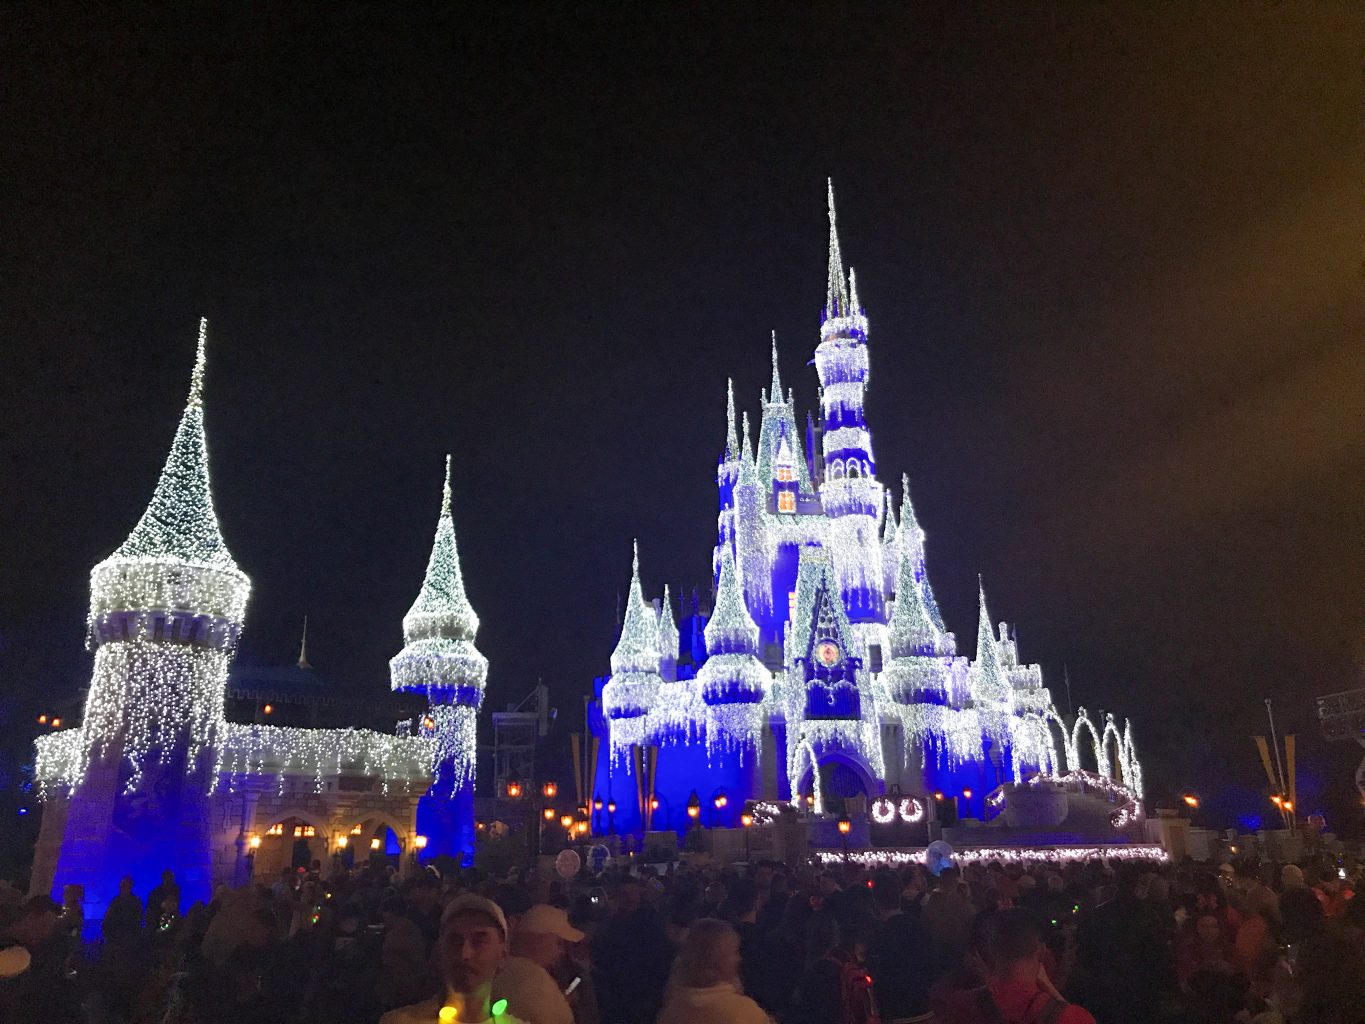 Cinderella Castle decorated in Christmas lights at Disney